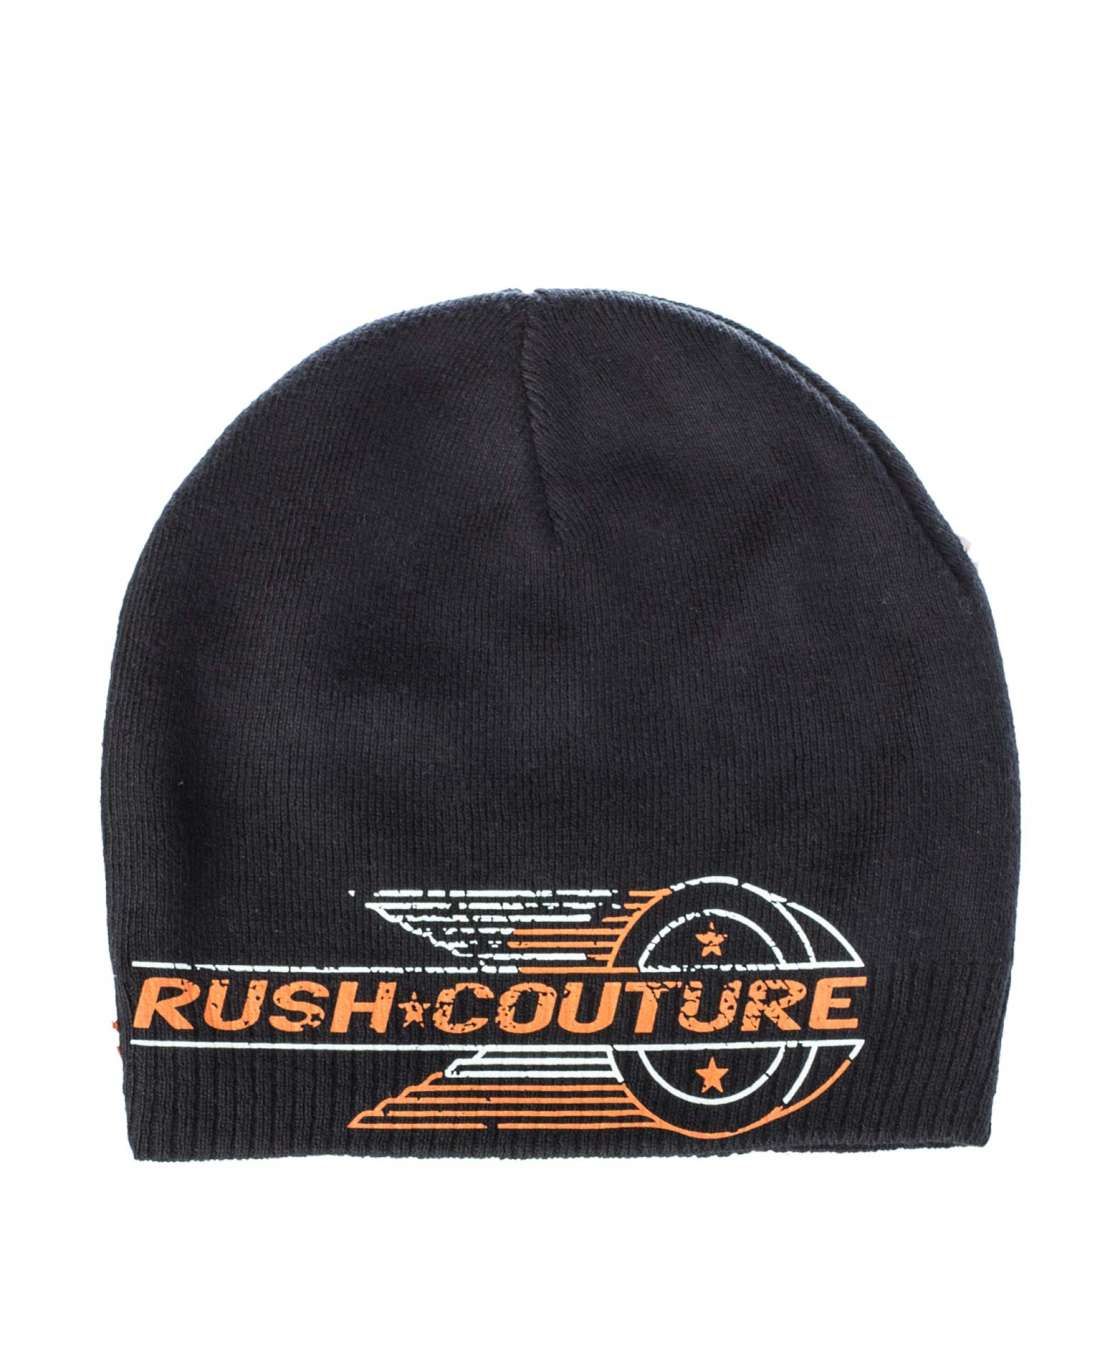 Motorpsycho Black Hat Rush Couture